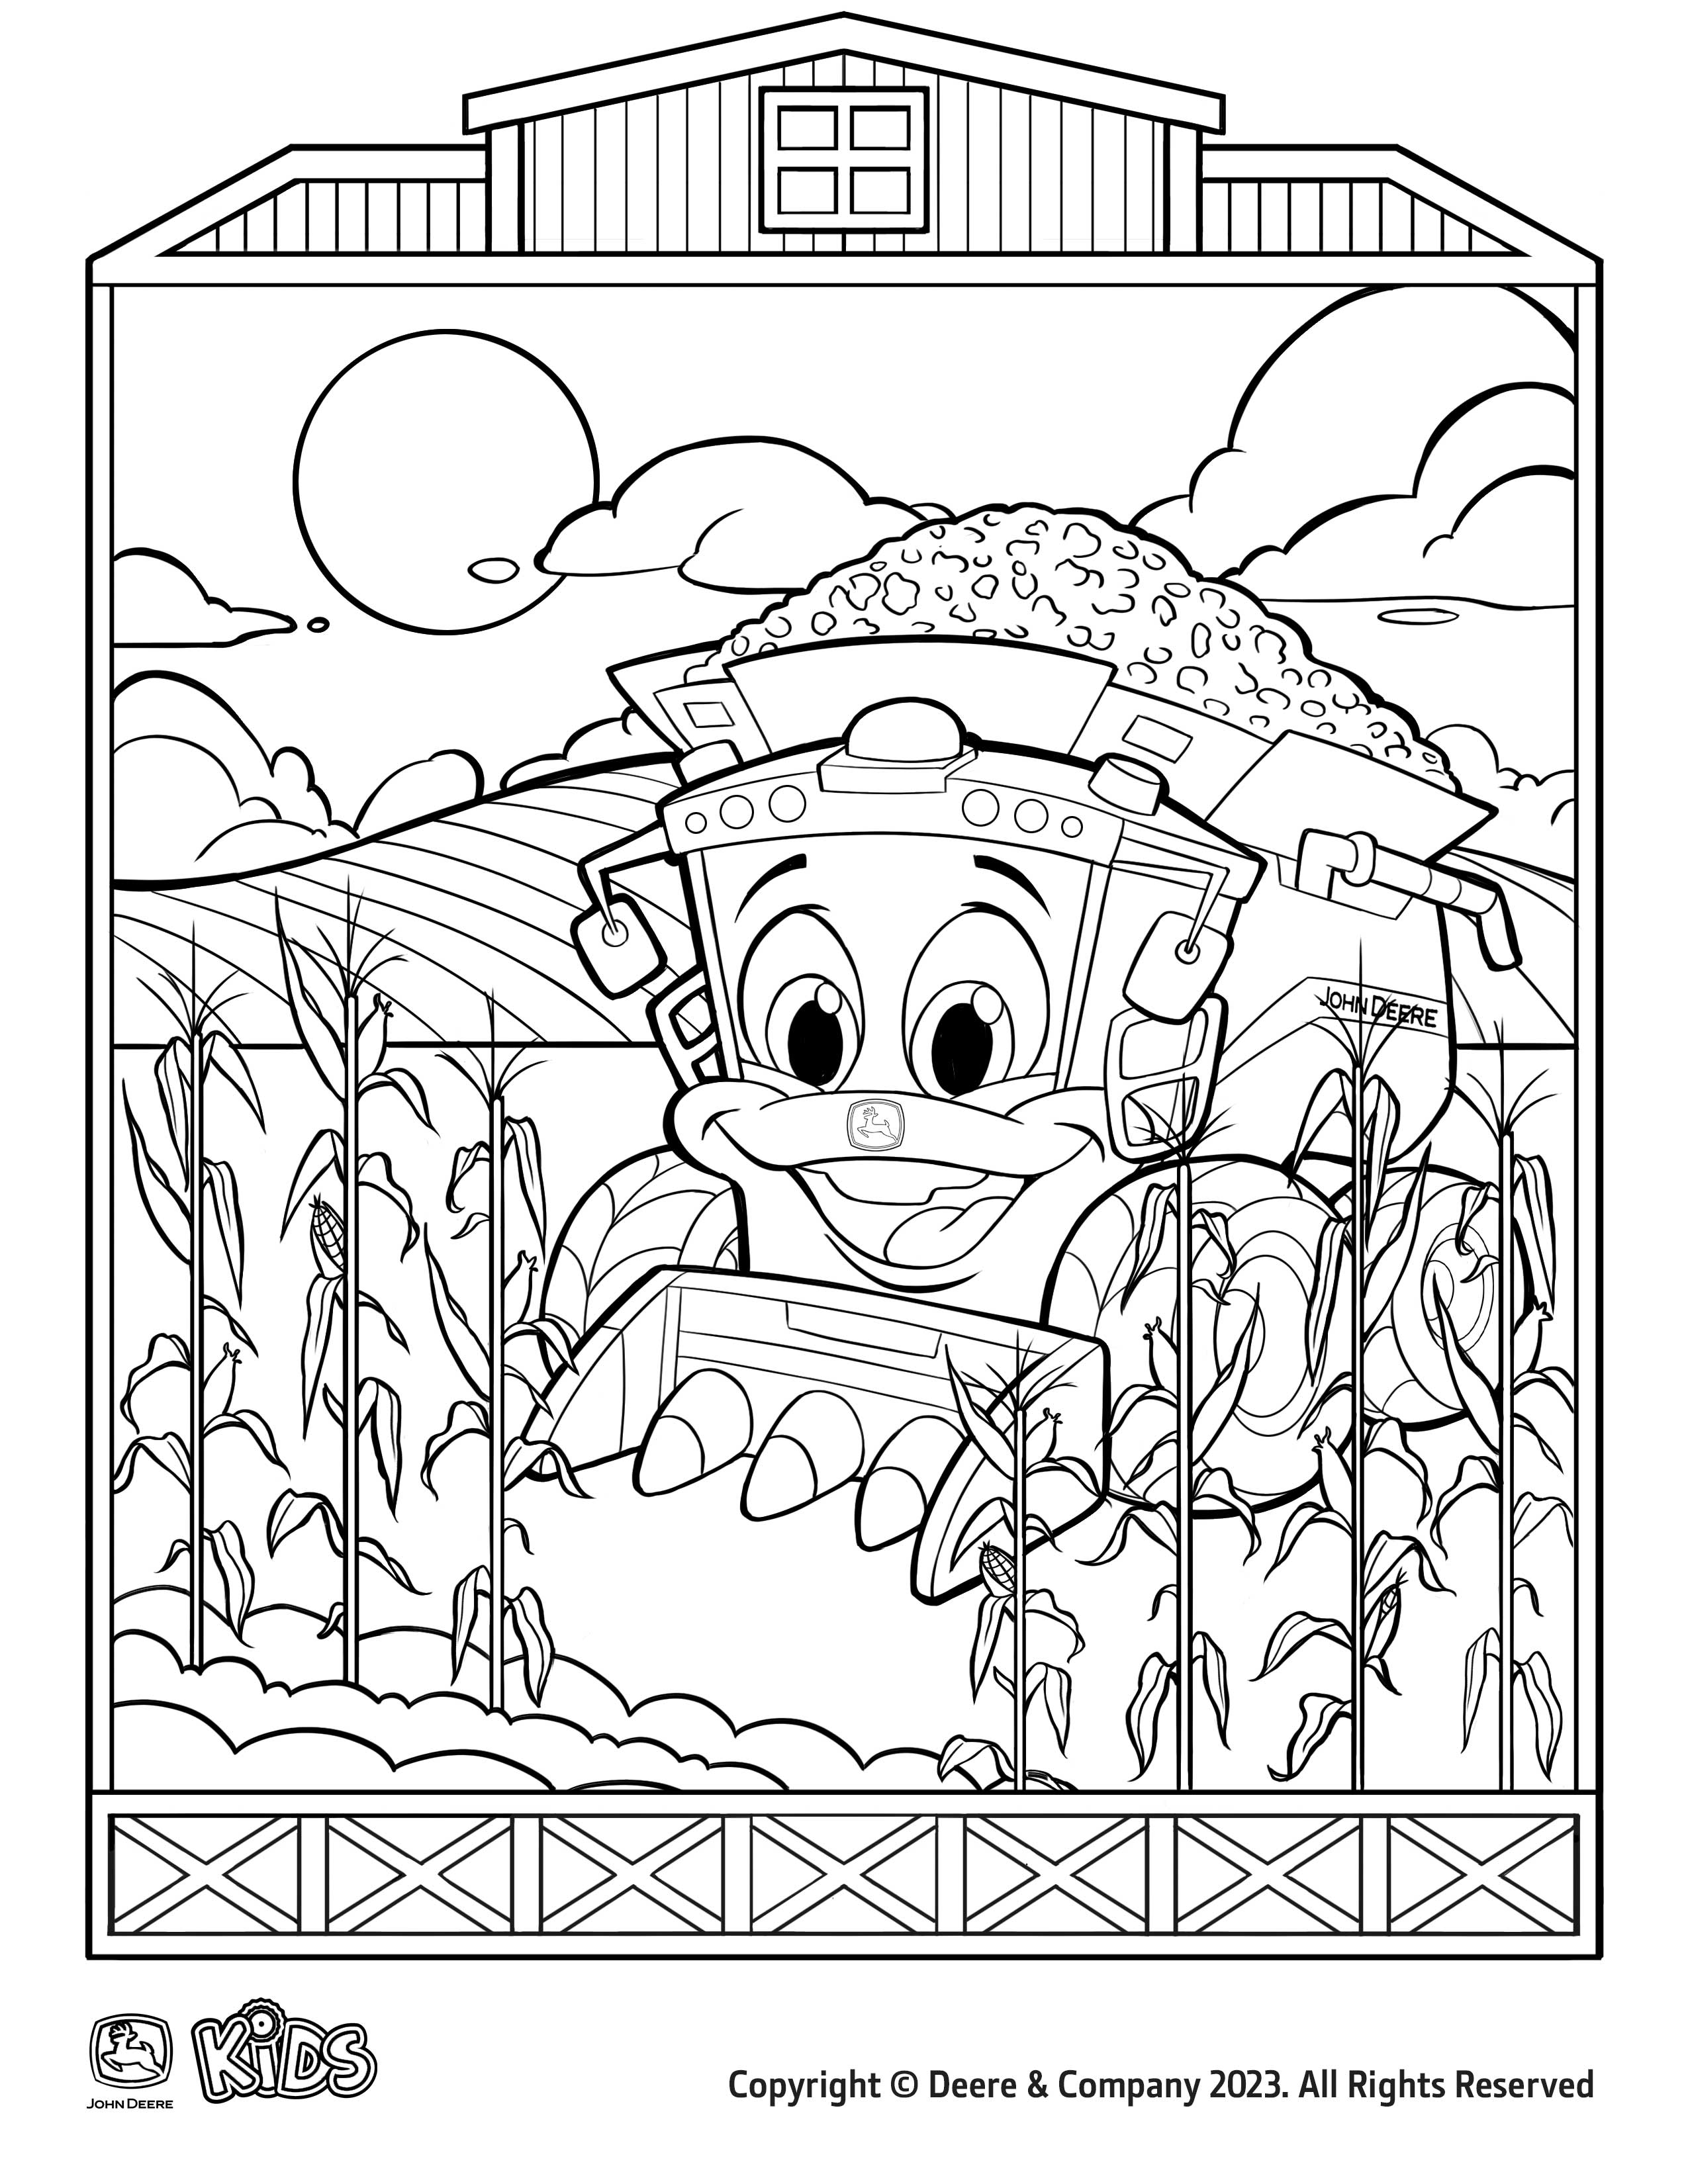 kids john deere tractor coloring pages